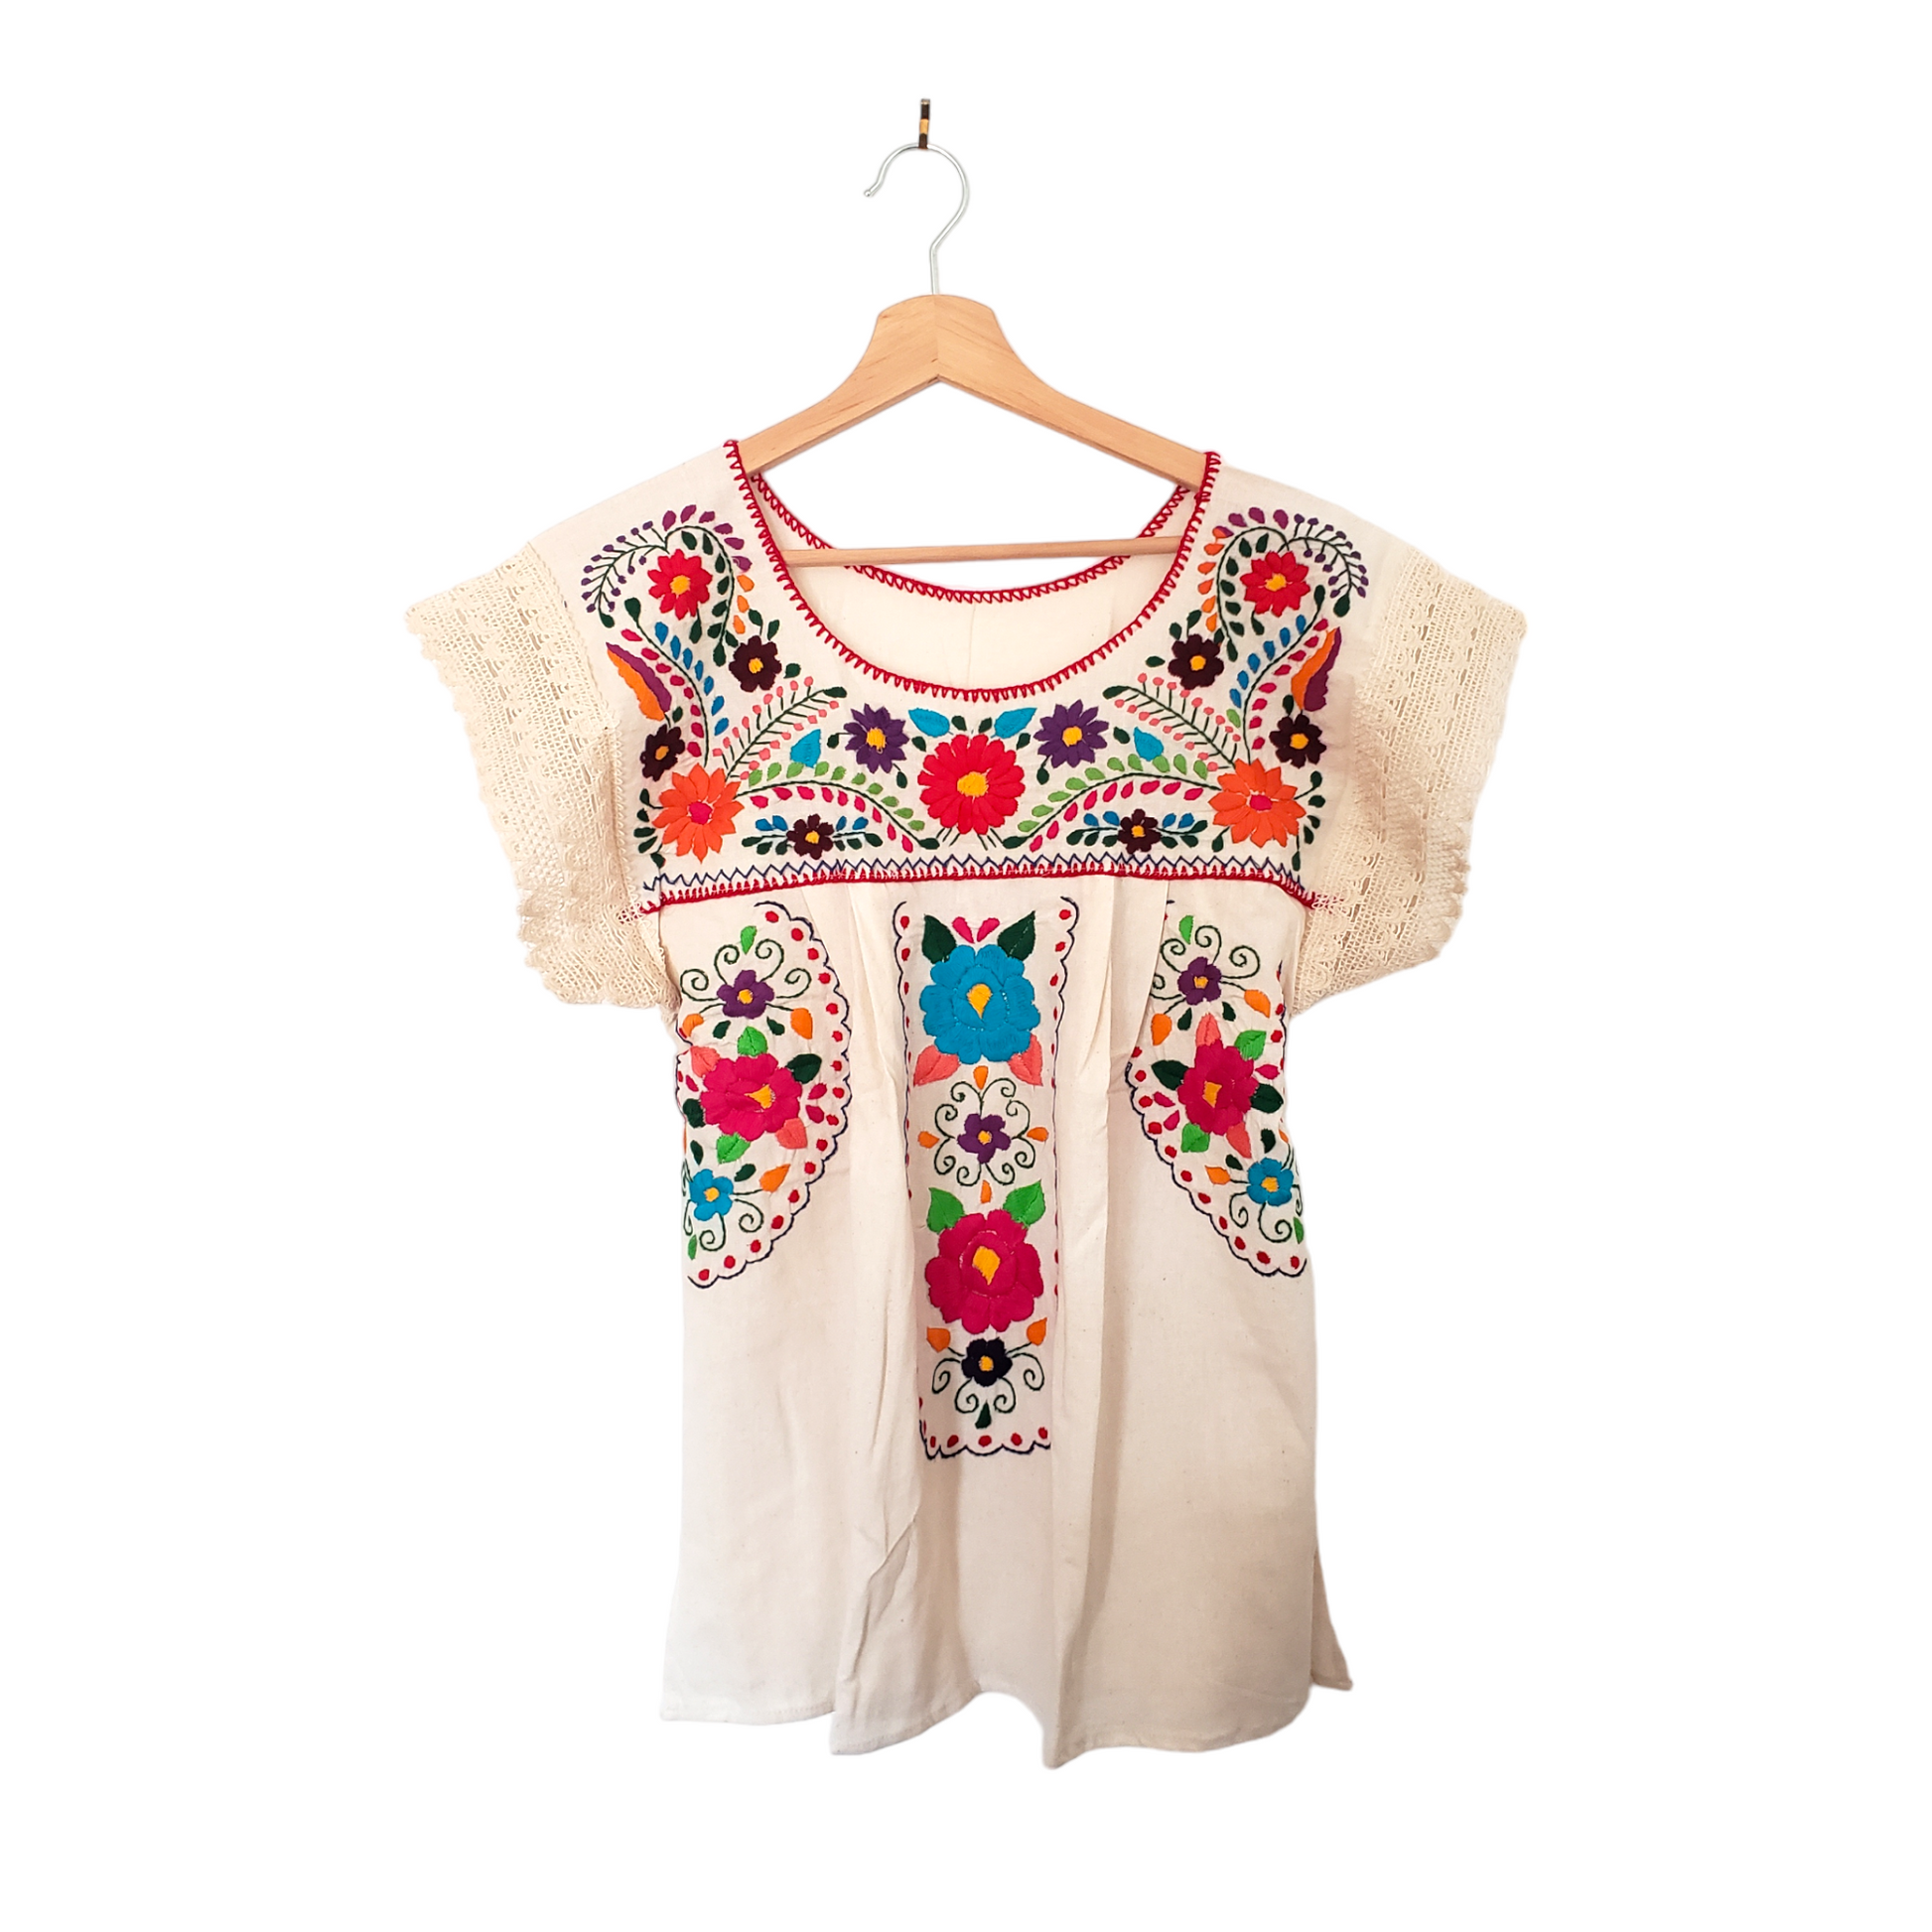 Traditional Mexican Embroidered Shirt Floral Top Blouse Handmade